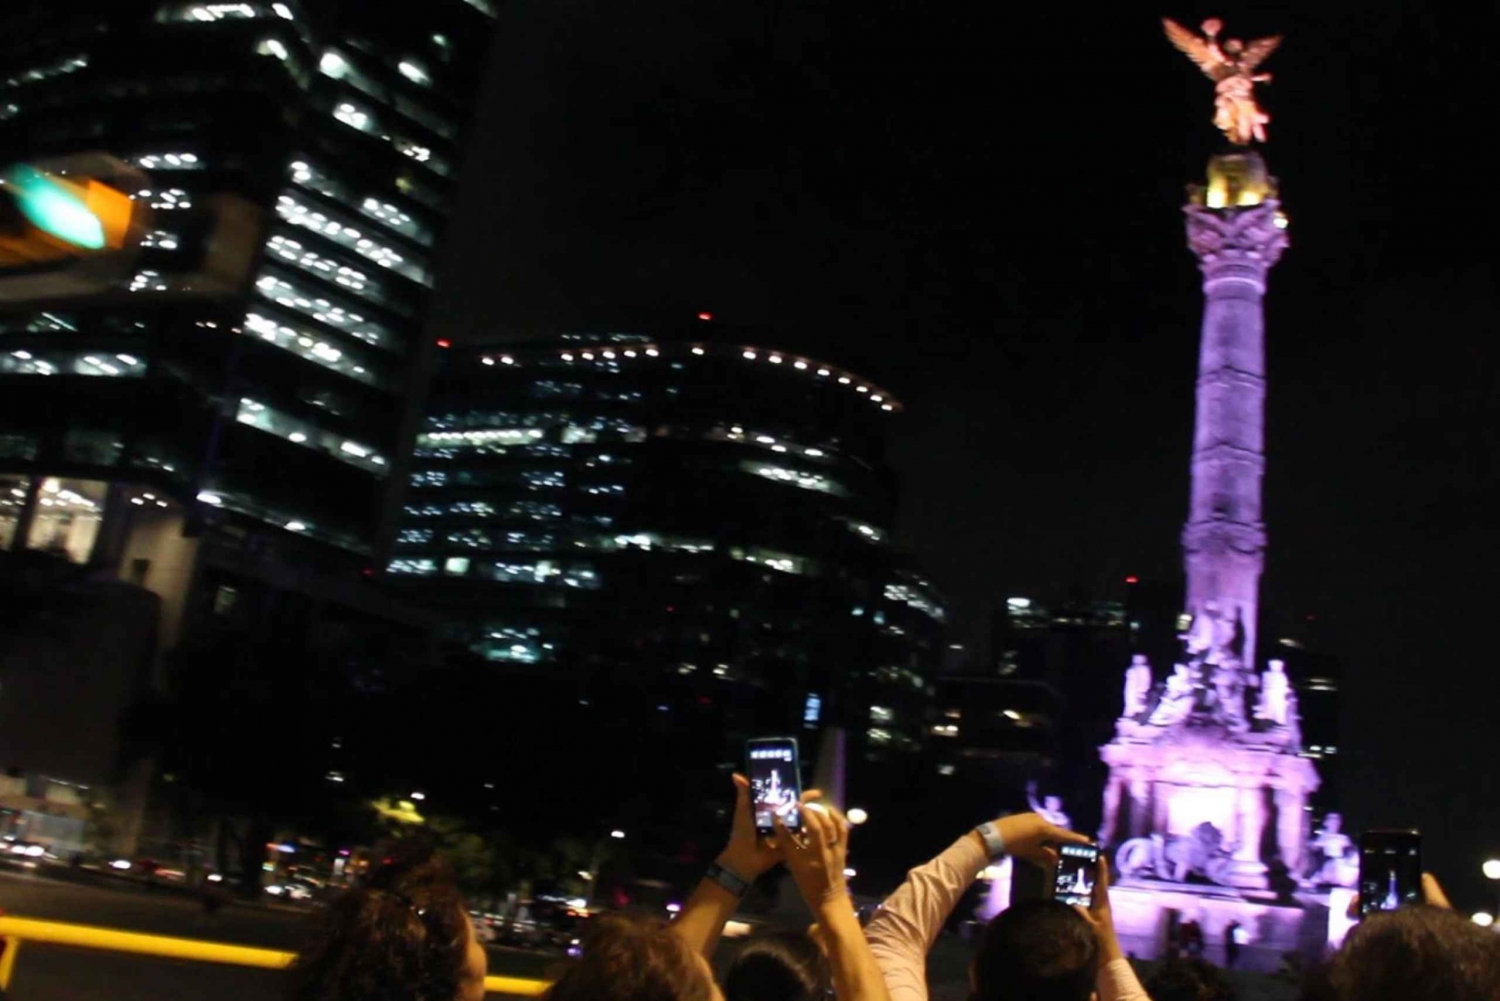 Mexico City: Night Tour in a Double Decker Bus